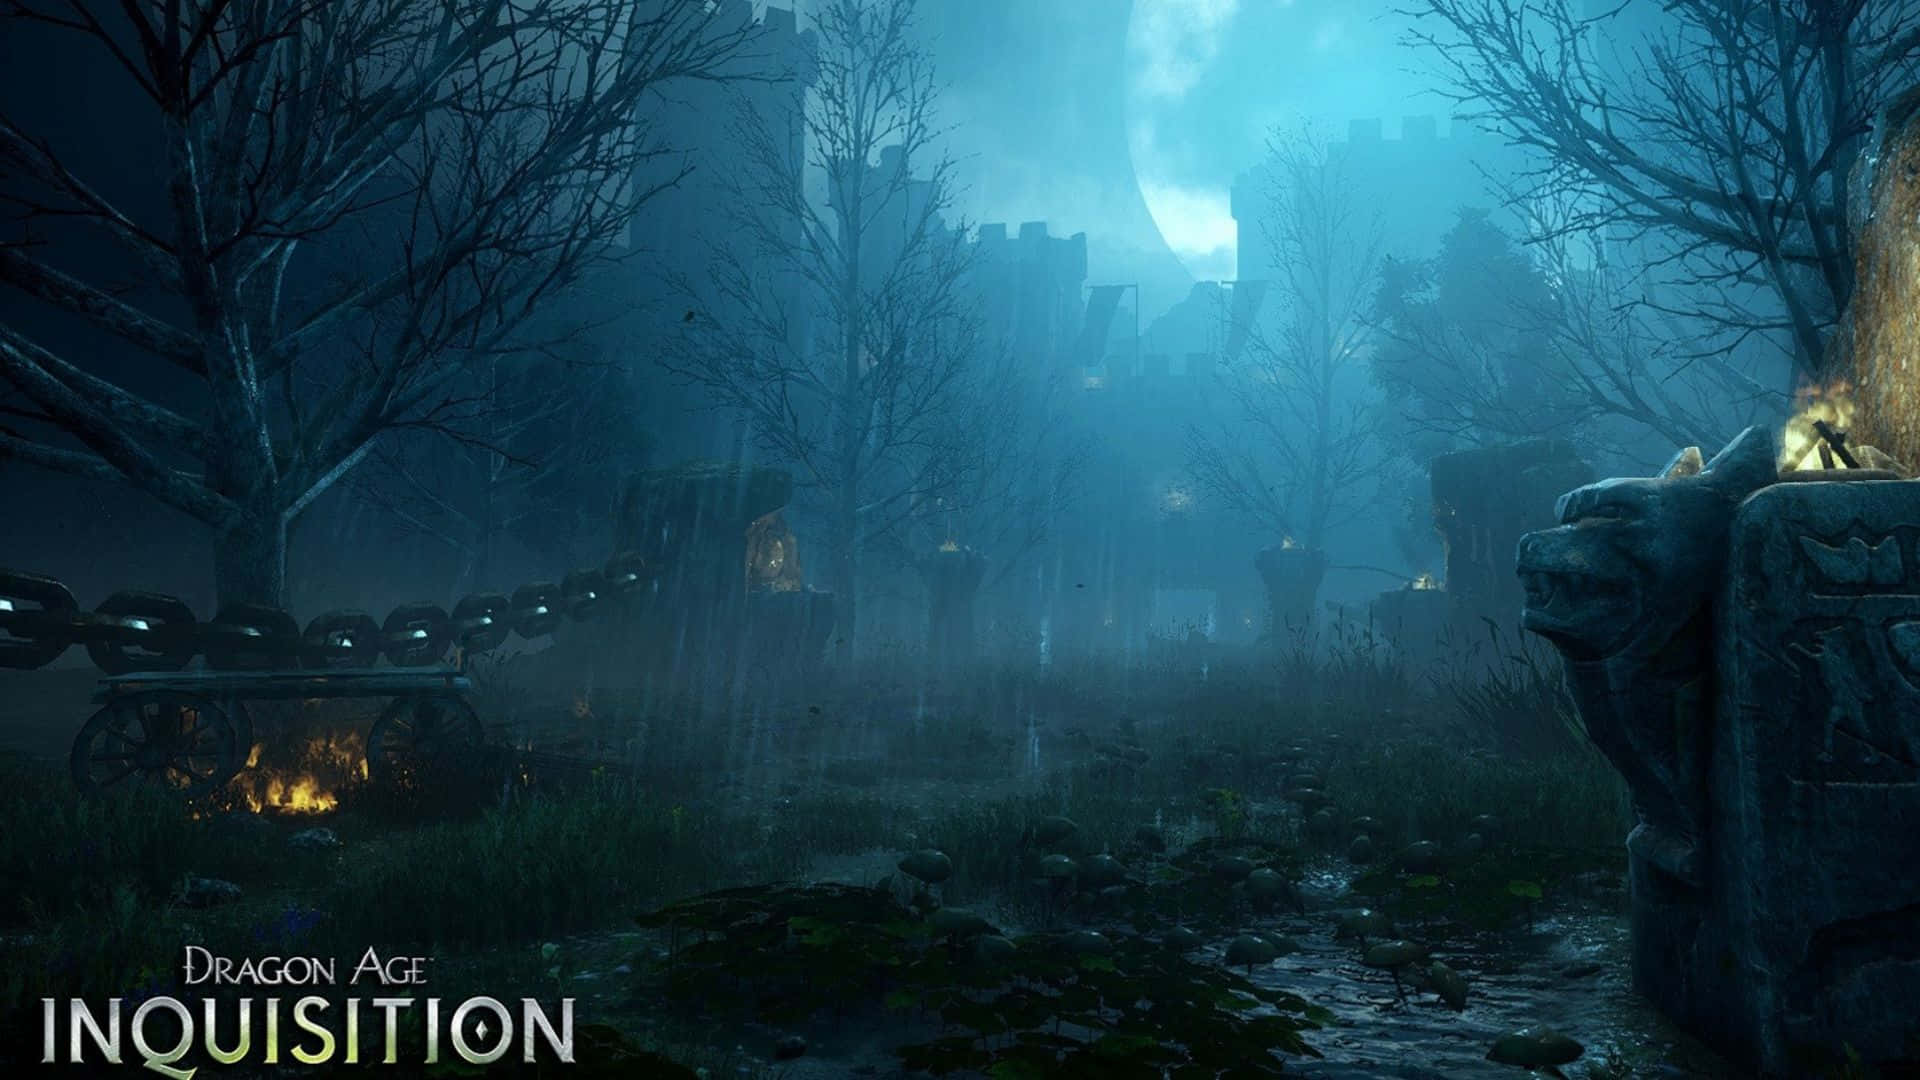 Full Moon Hd Dragon Age Inquisition Background